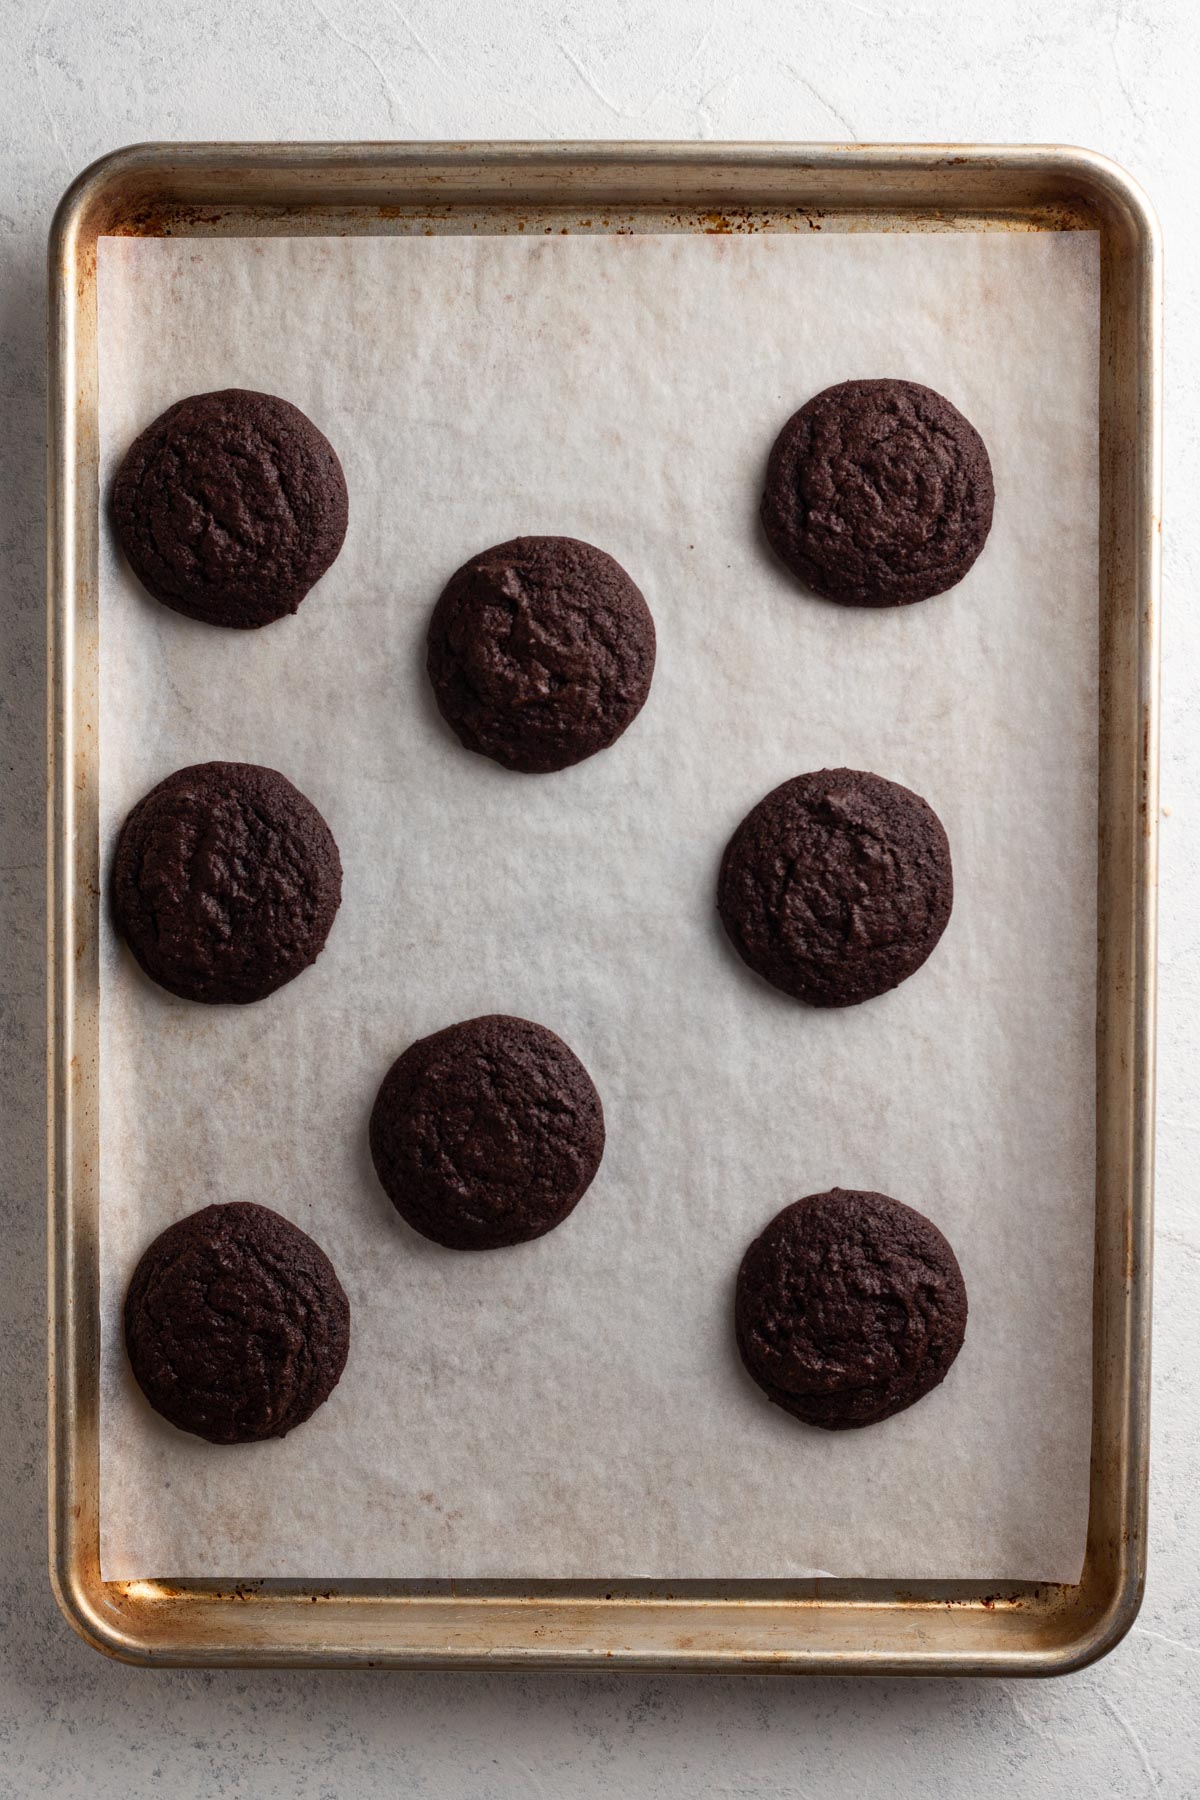 Baked chocolate peppermint cookies on a baking sheet lined with parchment paper.